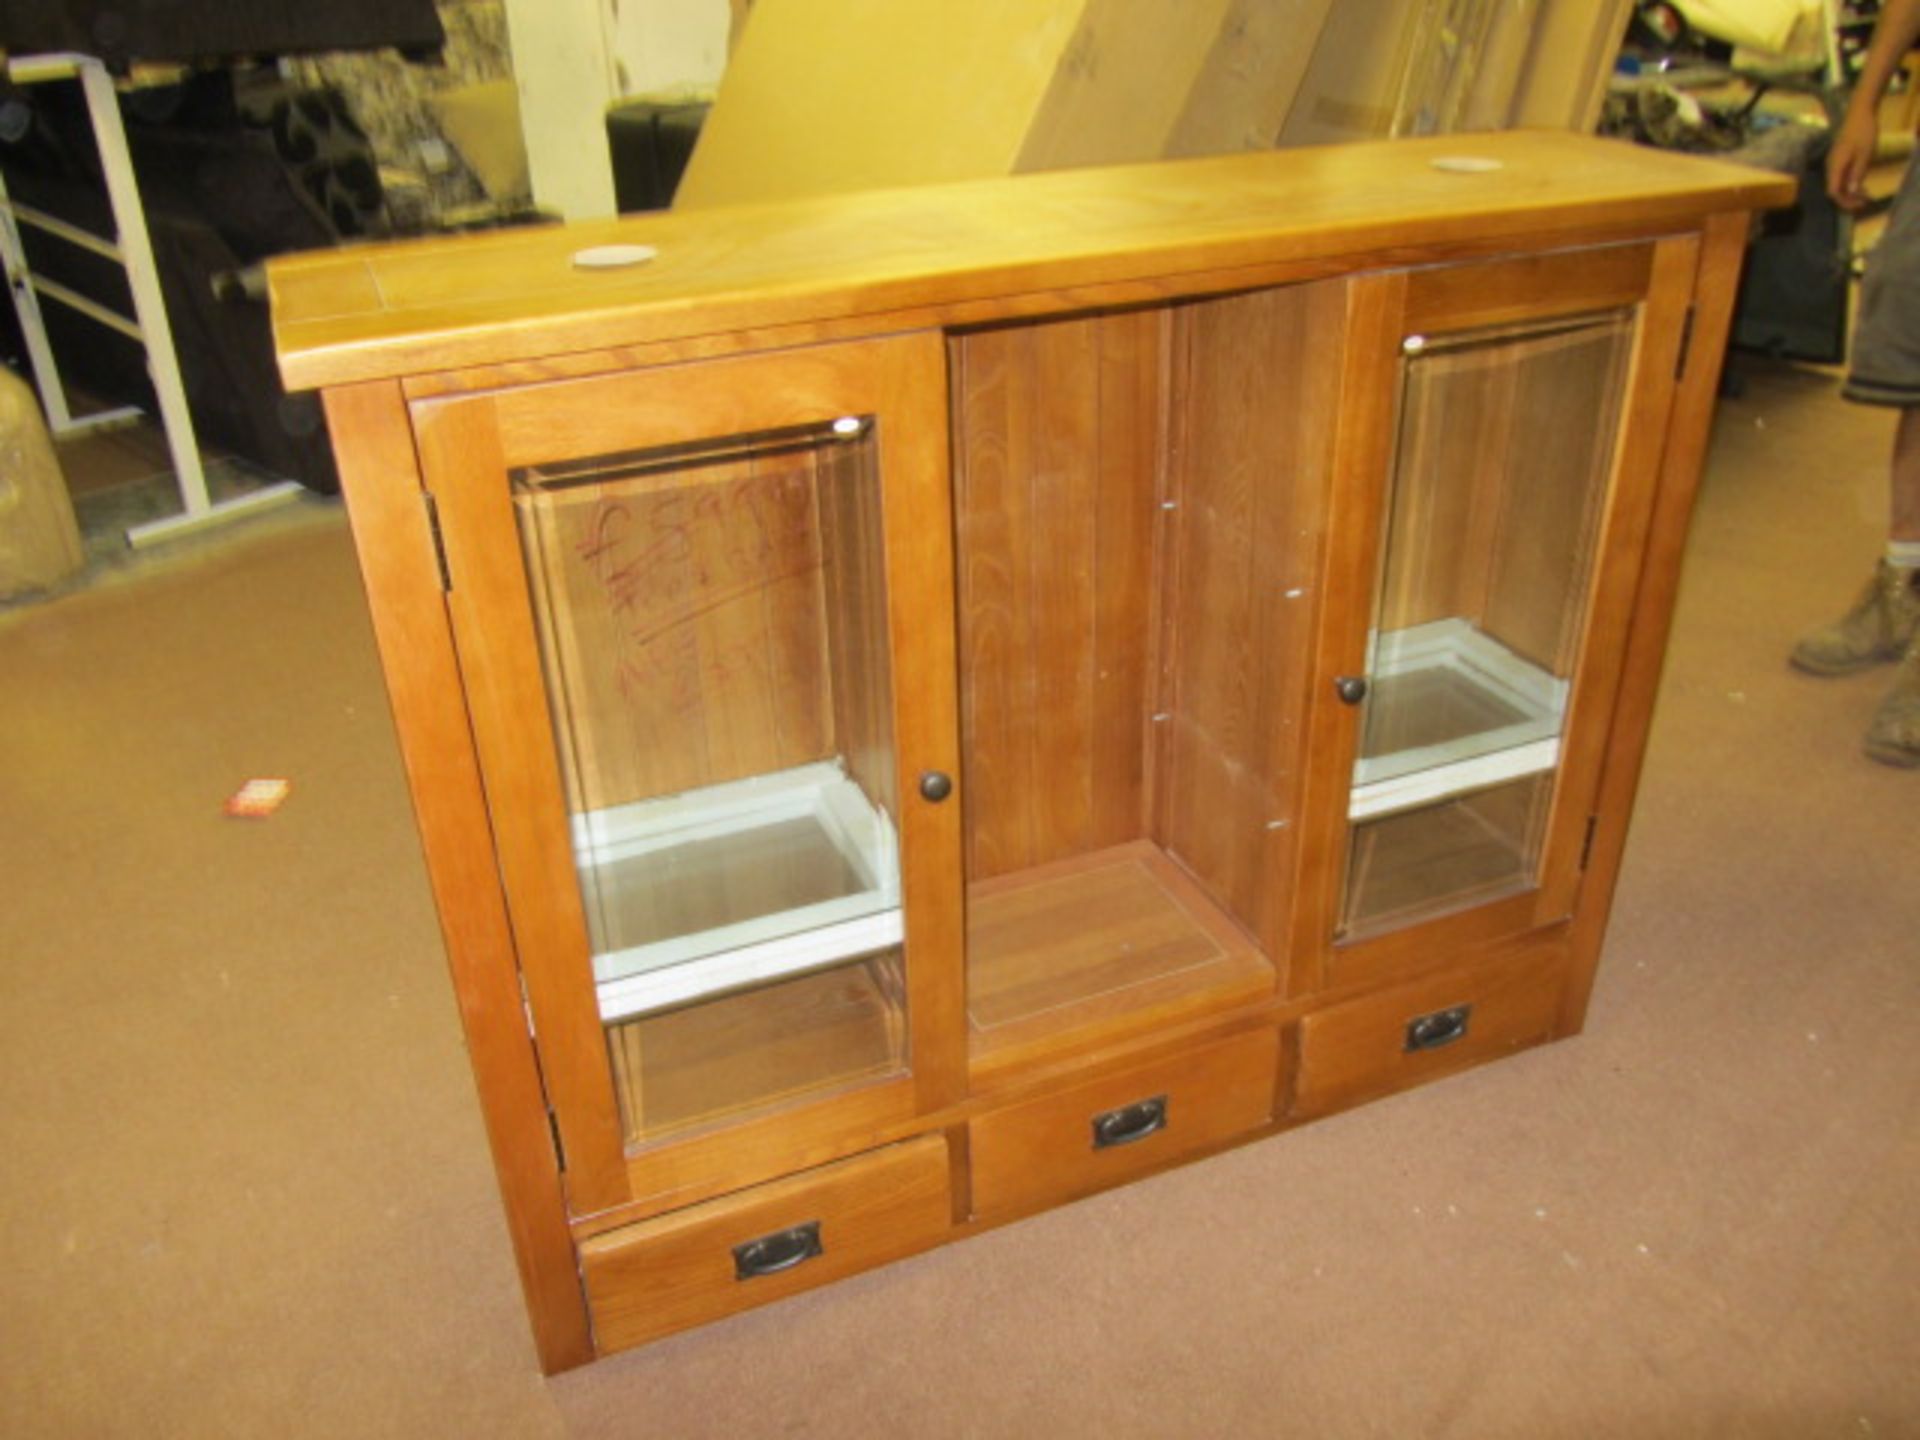 Glazed Dresser Top, with glass shelves, 2 glass doors and open centre over 3 drawers, Country Classi - Image 2 of 2